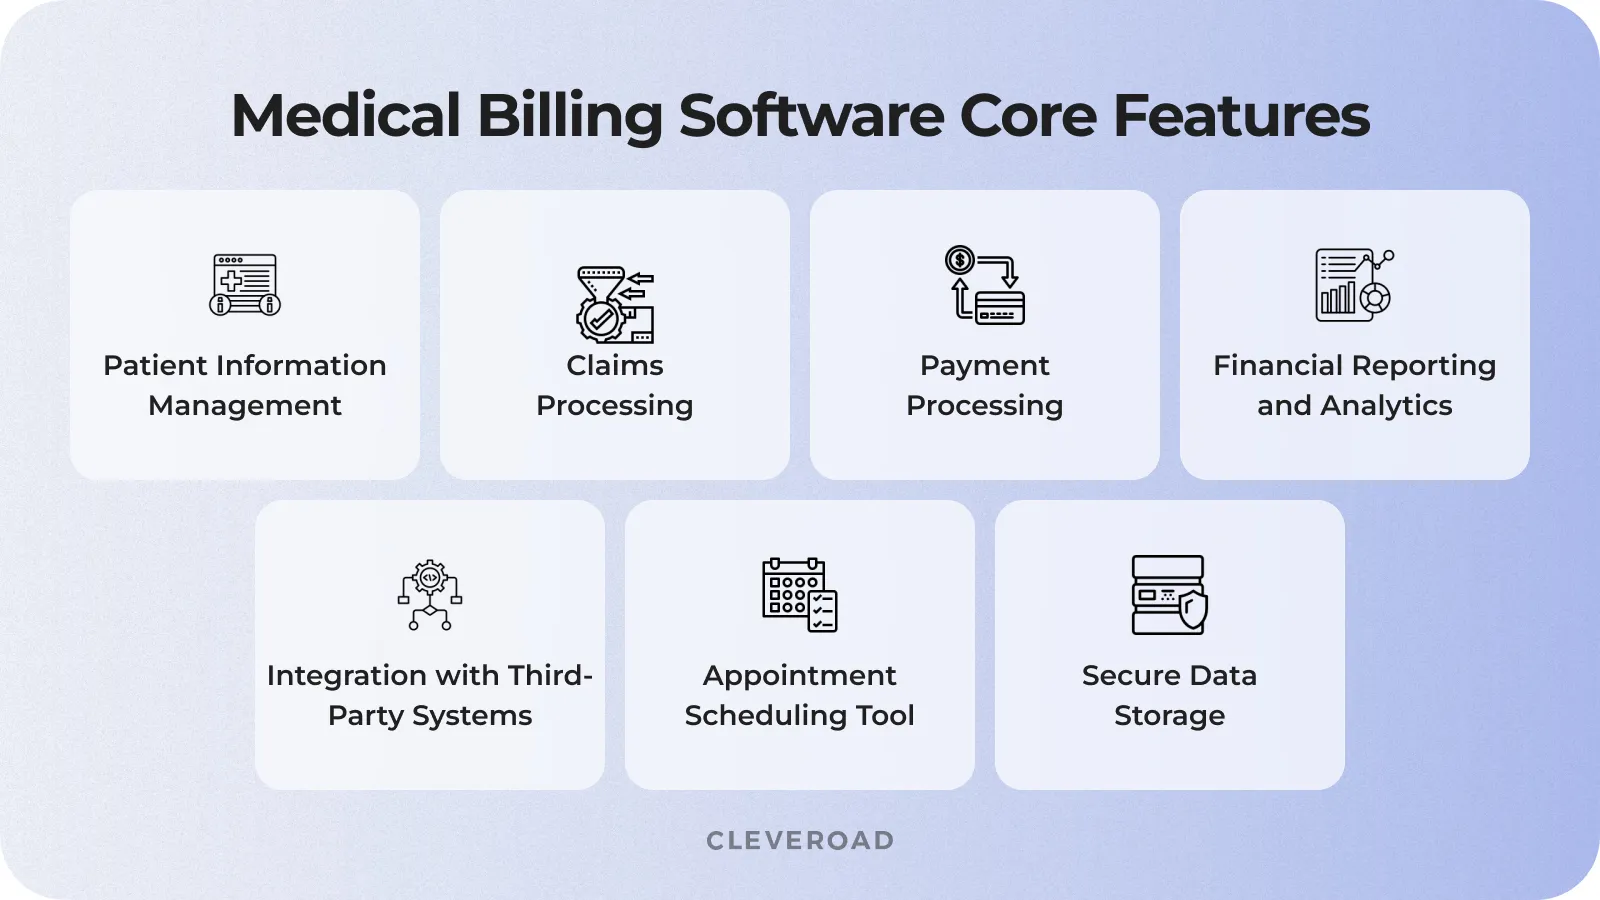 Core features of medical billing software